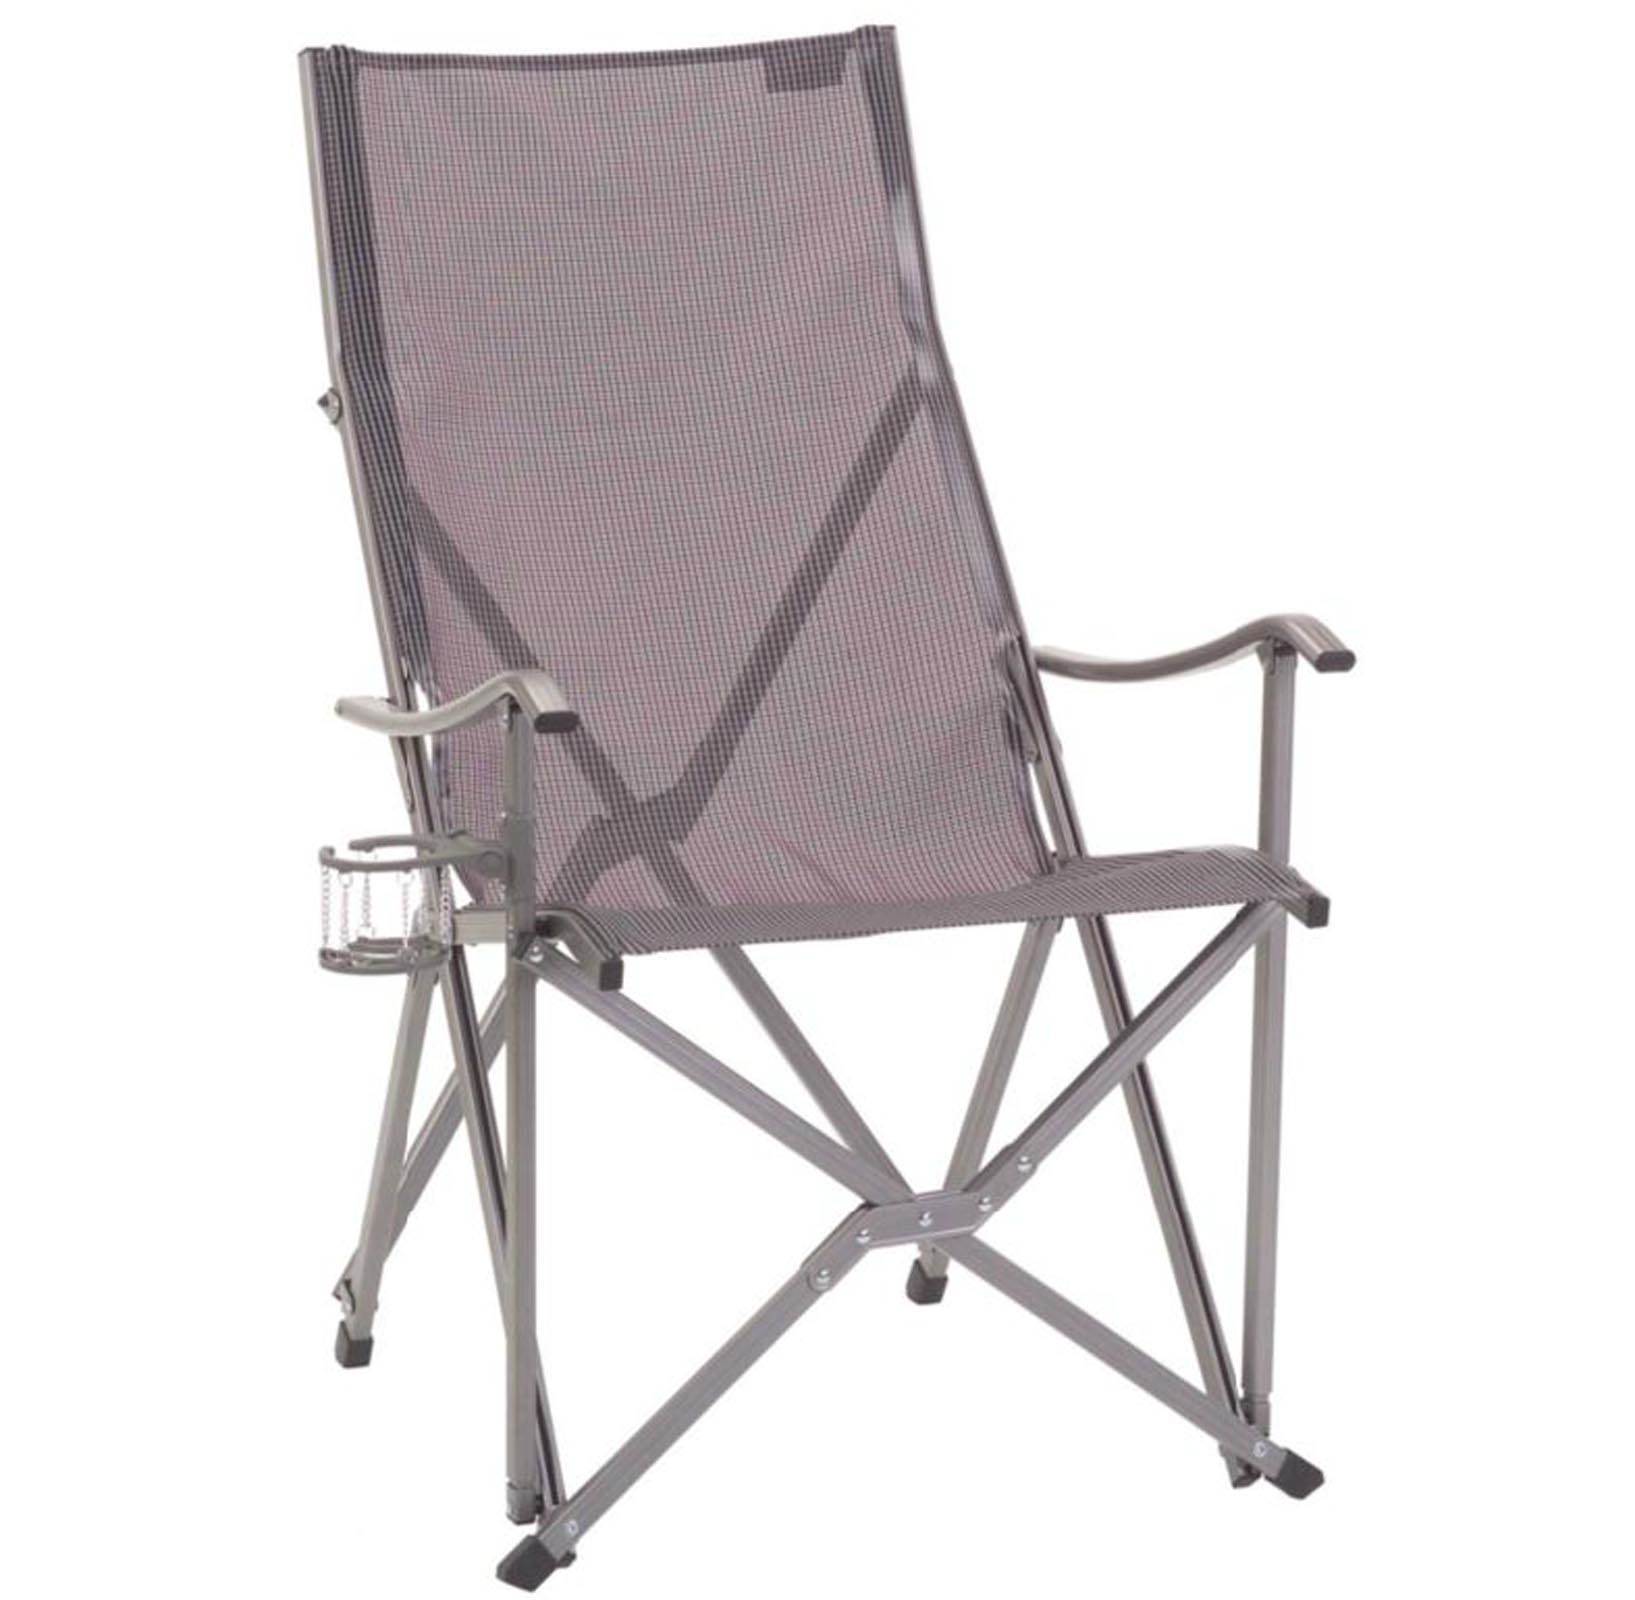 Coleman Patio Weather-Resistant Adult Sling Chair with Drink Holder, Gray - image 1 of 8